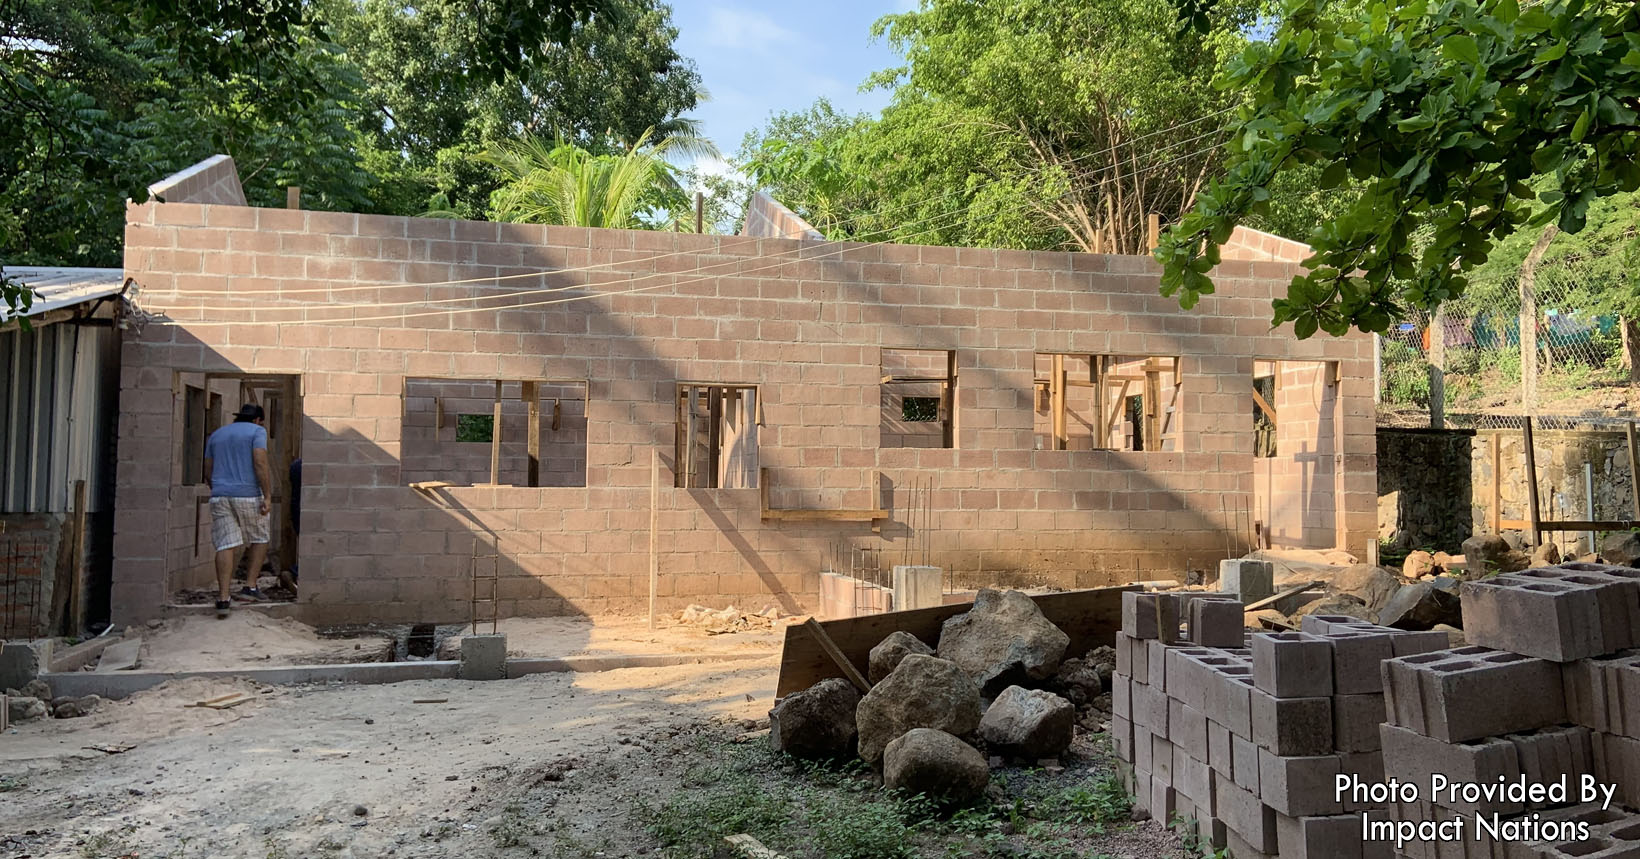 Phase 1 walls are coming up and things are moving along! Both homes will house up to 10 children each. Our desire is for each child to have loving family environment.